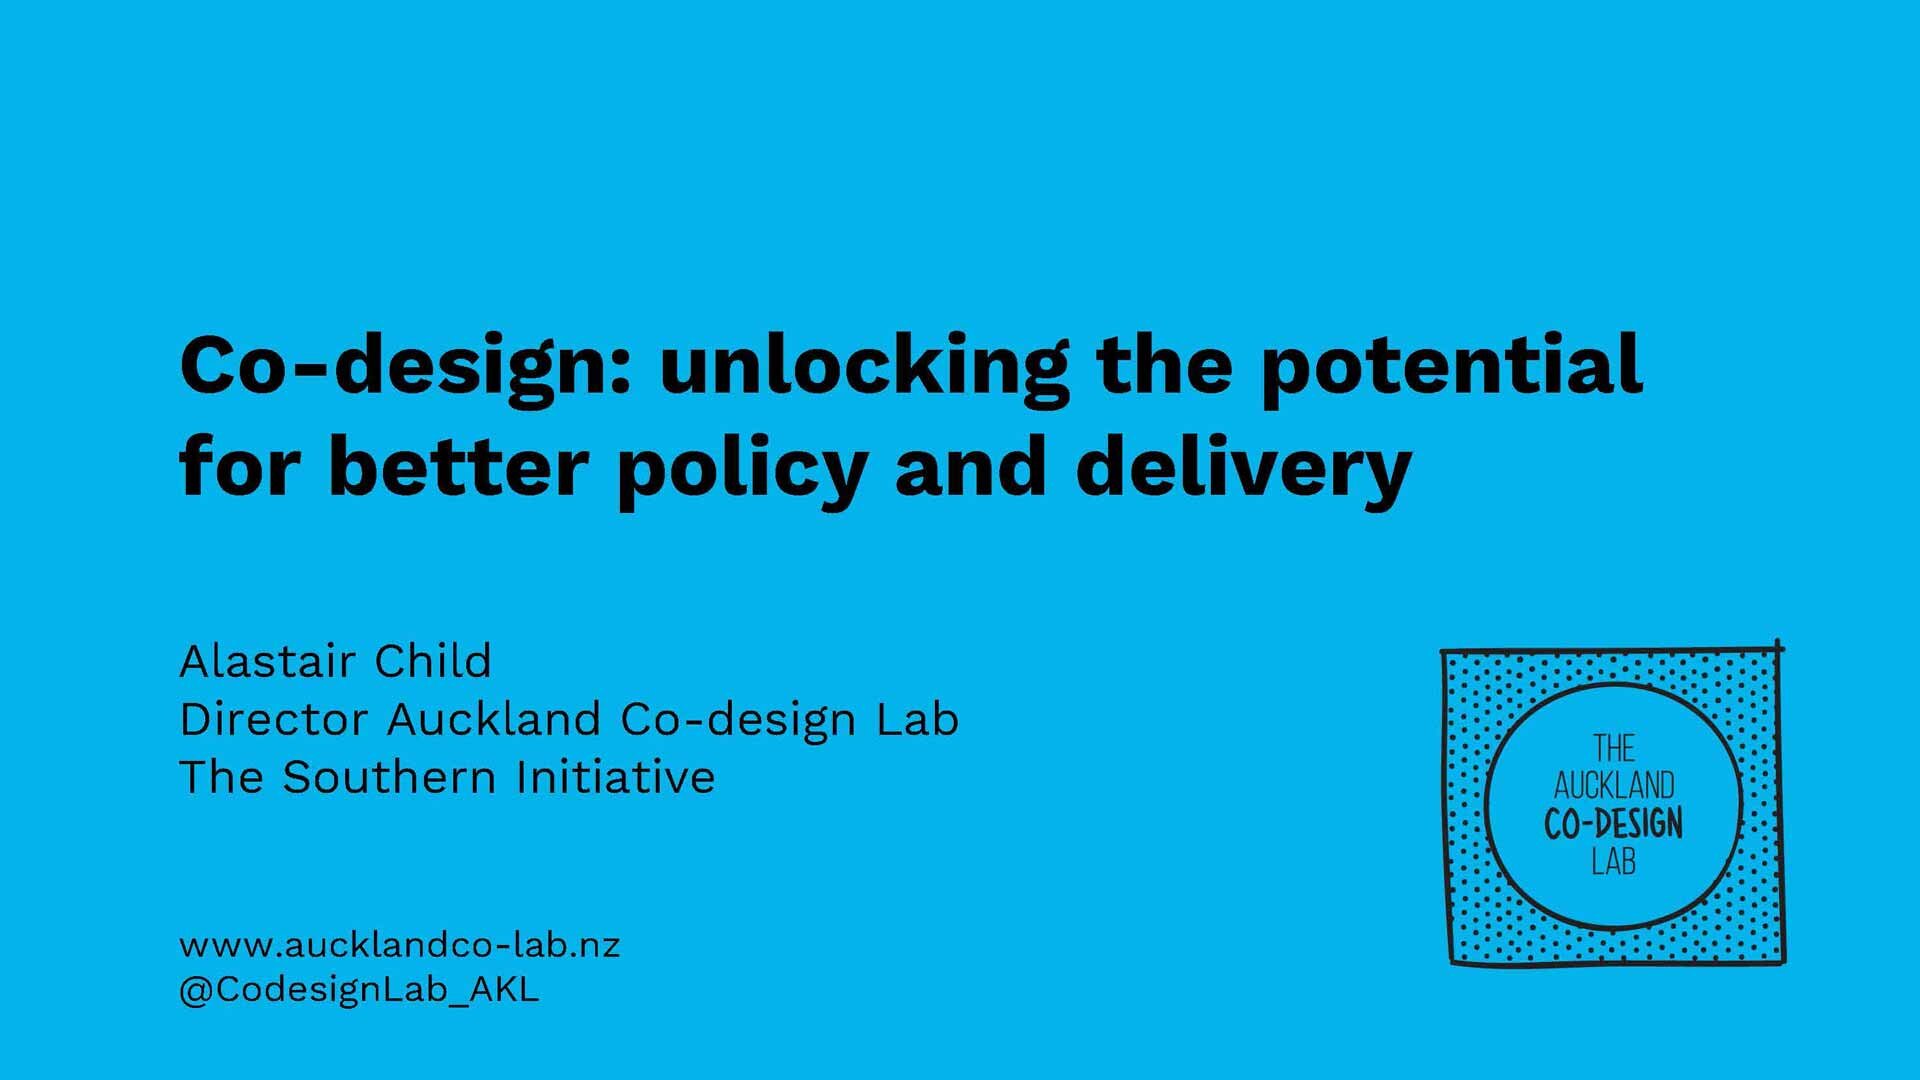 ANZSOG+-+Co-design_+unlocking+the+potential+for+better+policy+and+delivery_Page_01.jpg